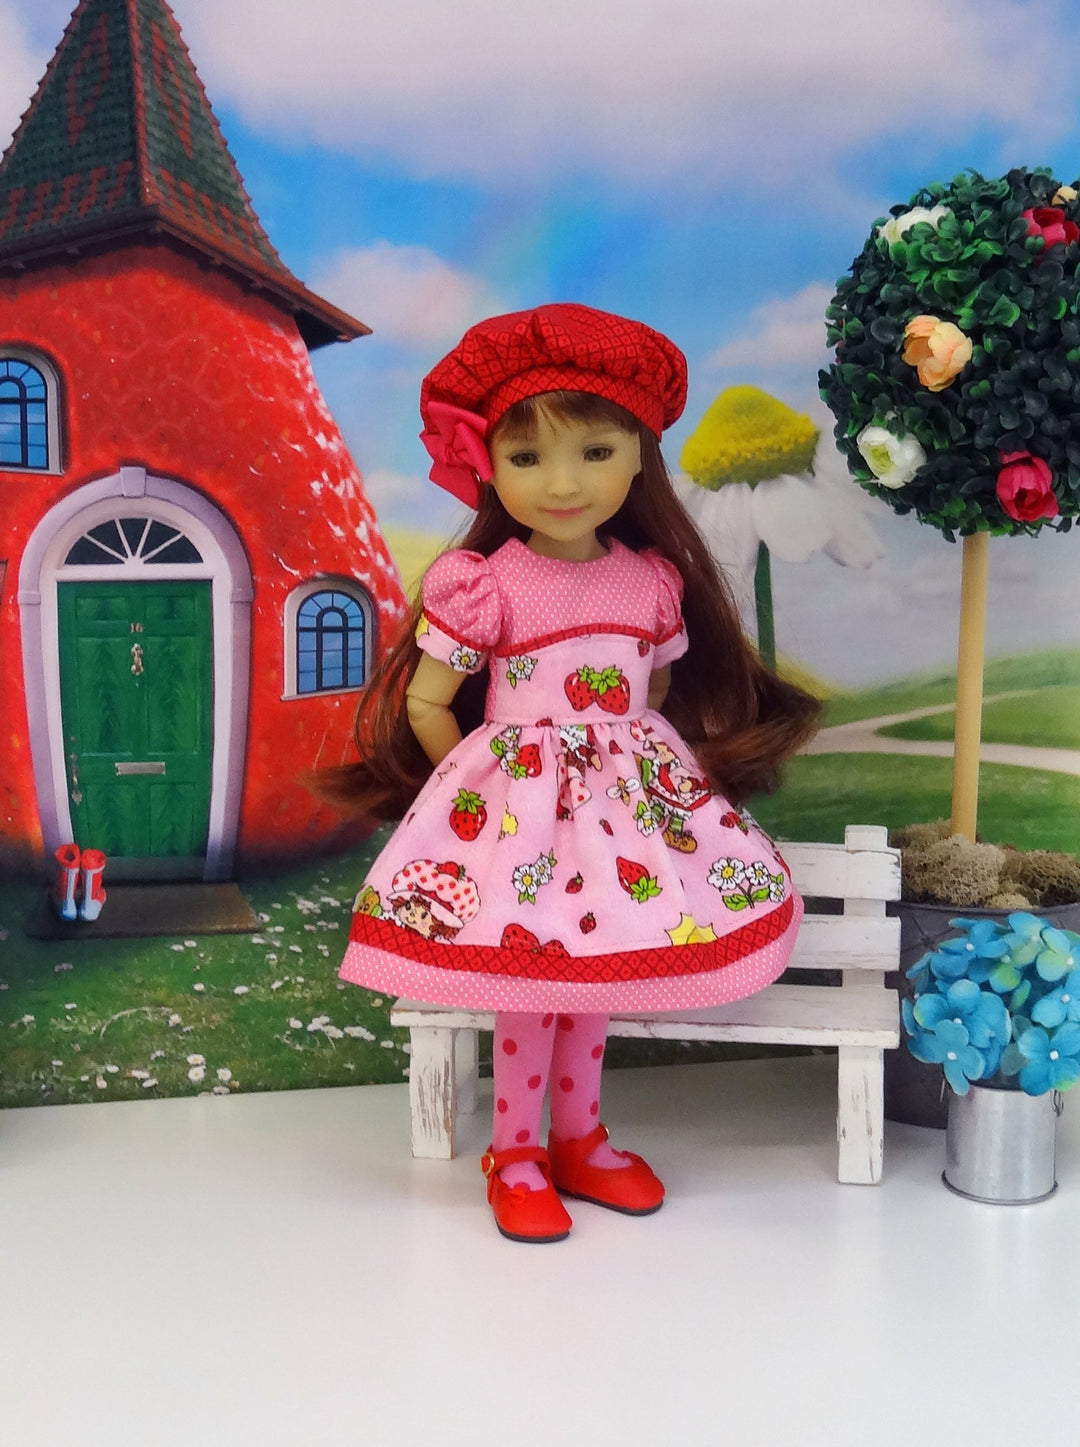 Vintage Shortcake - dress for Ruby Red Fashion Friends doll